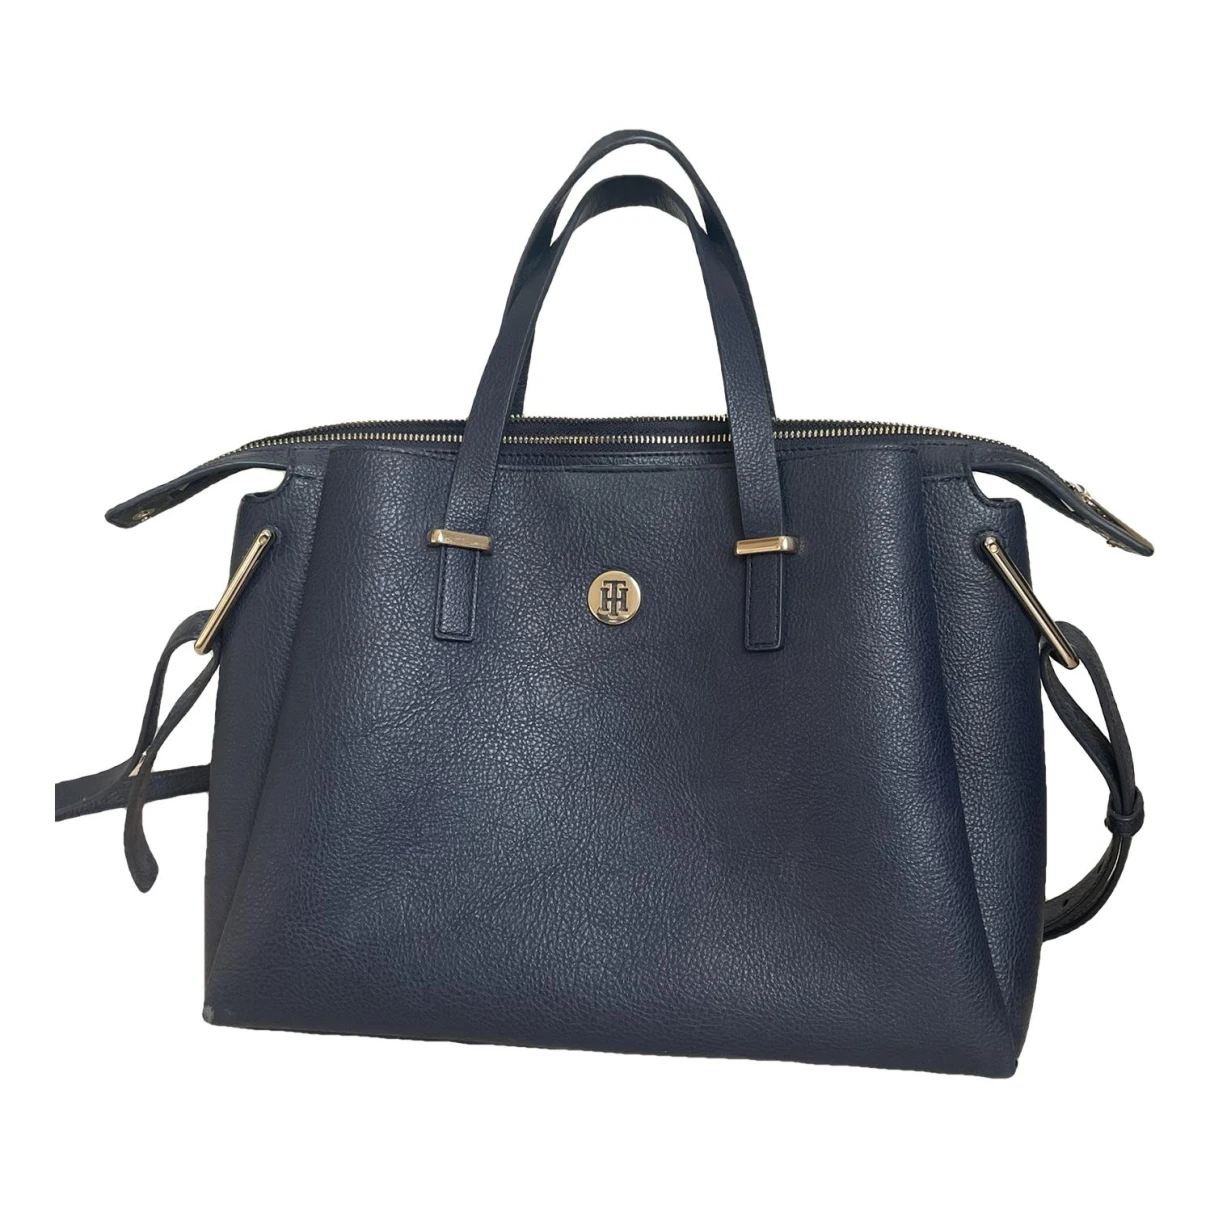 Pre-owned Tommy Hilfiger Leather Handbag In Navy